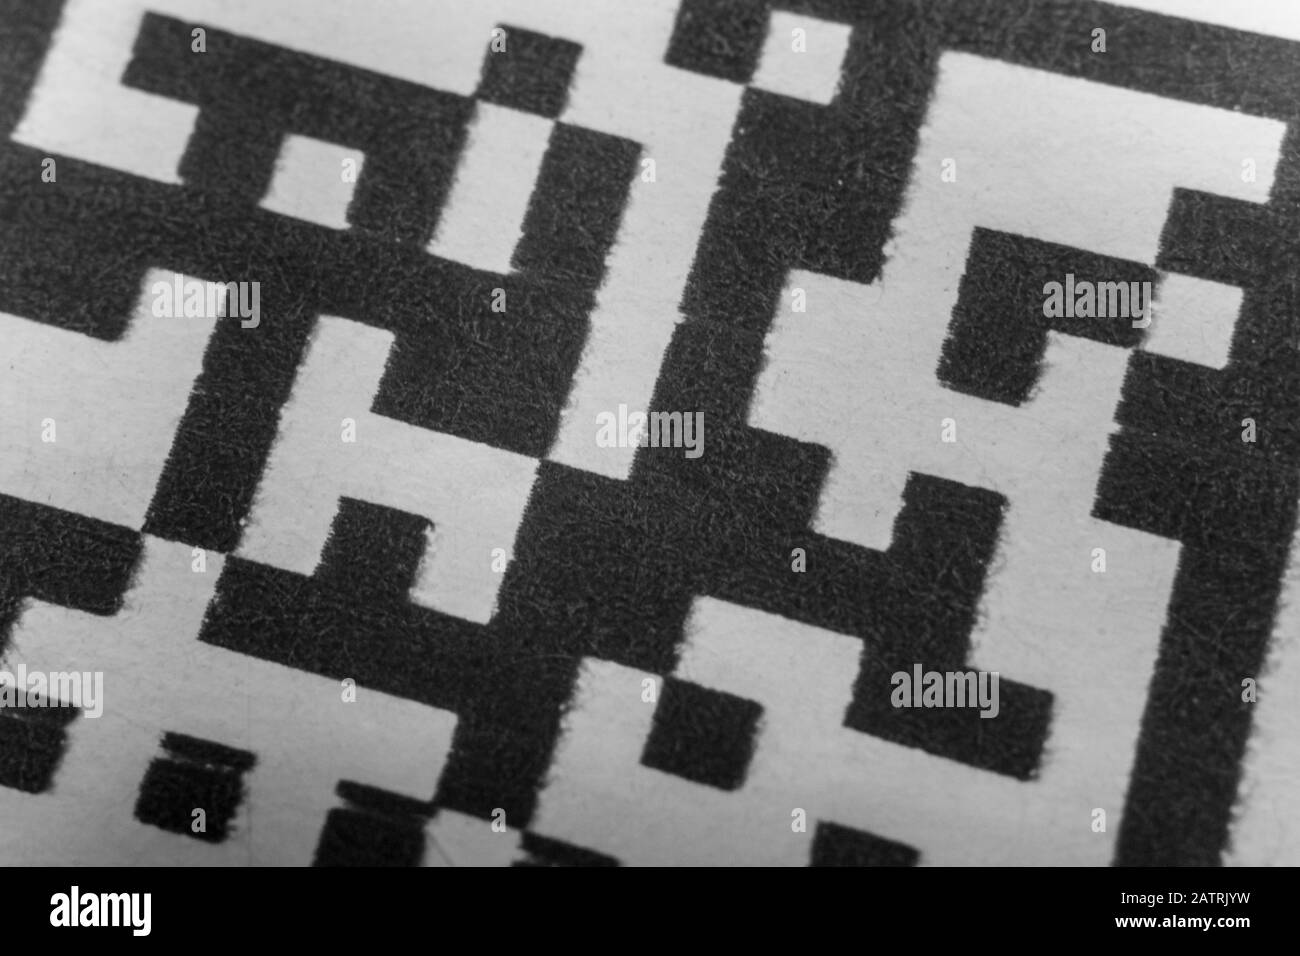 Abstract monochrome close up of isolated printed QR data matrix bar code on white paper label background from material inventory tracking system Stock Photo